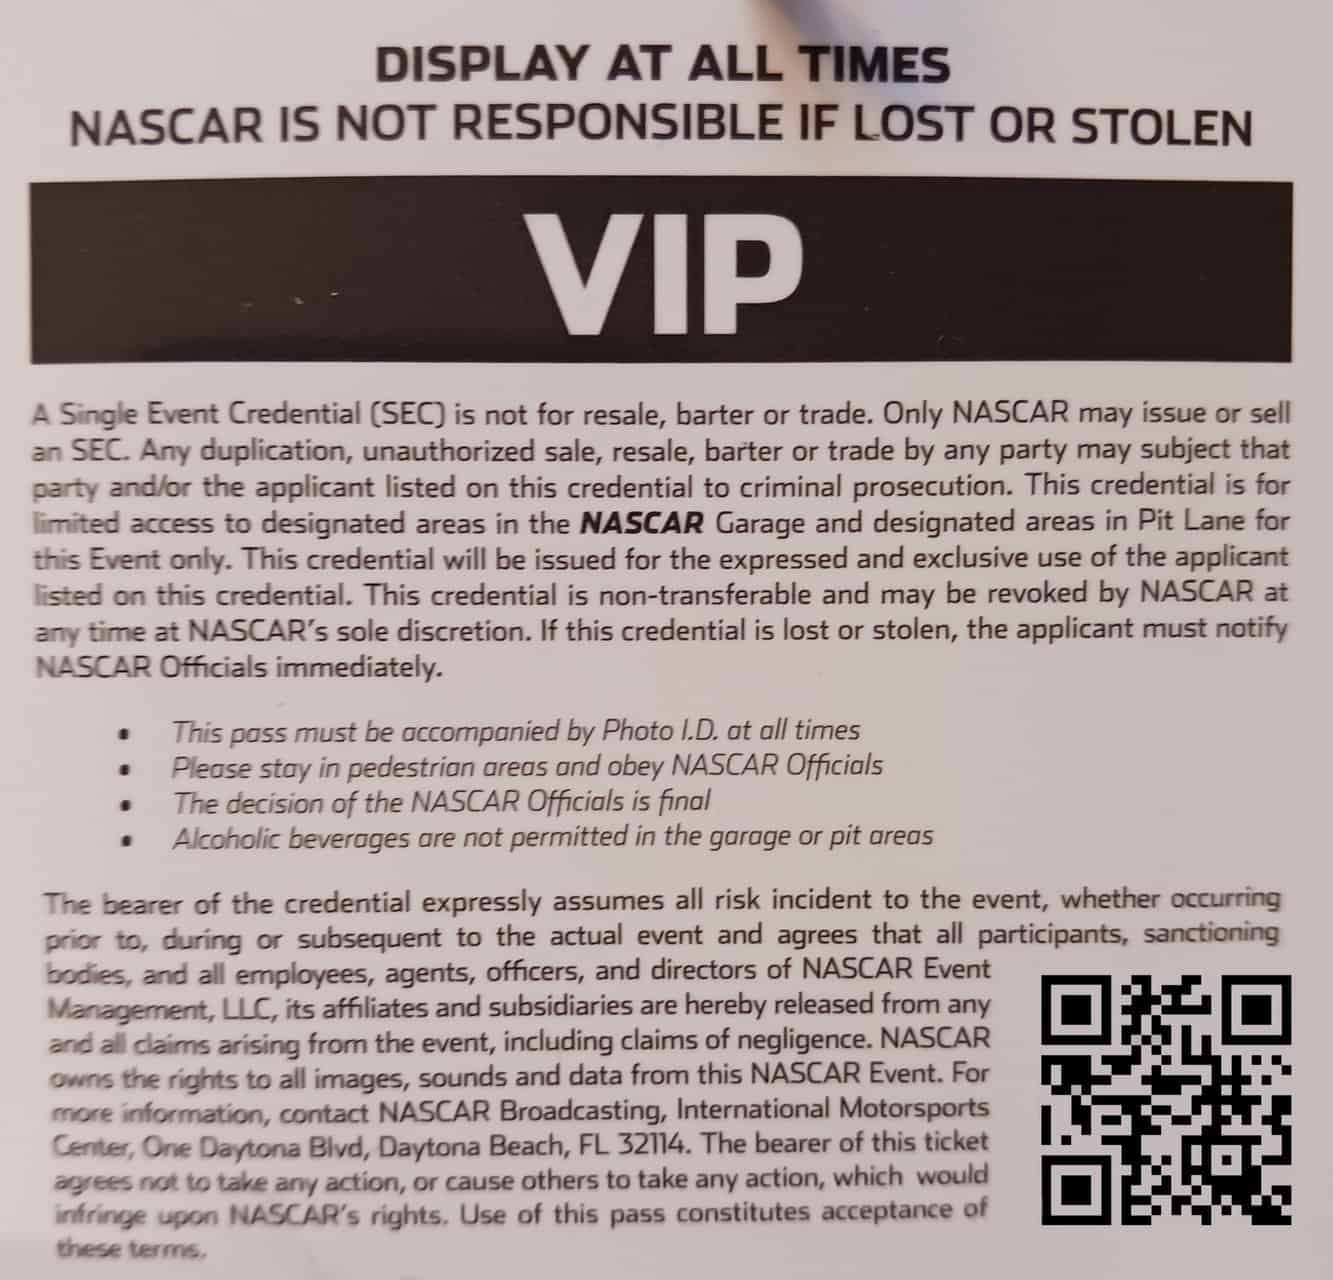 NASCAR forbids the private sale of its VIP passes and suspended Joshua Crrech after an investion into the practice.